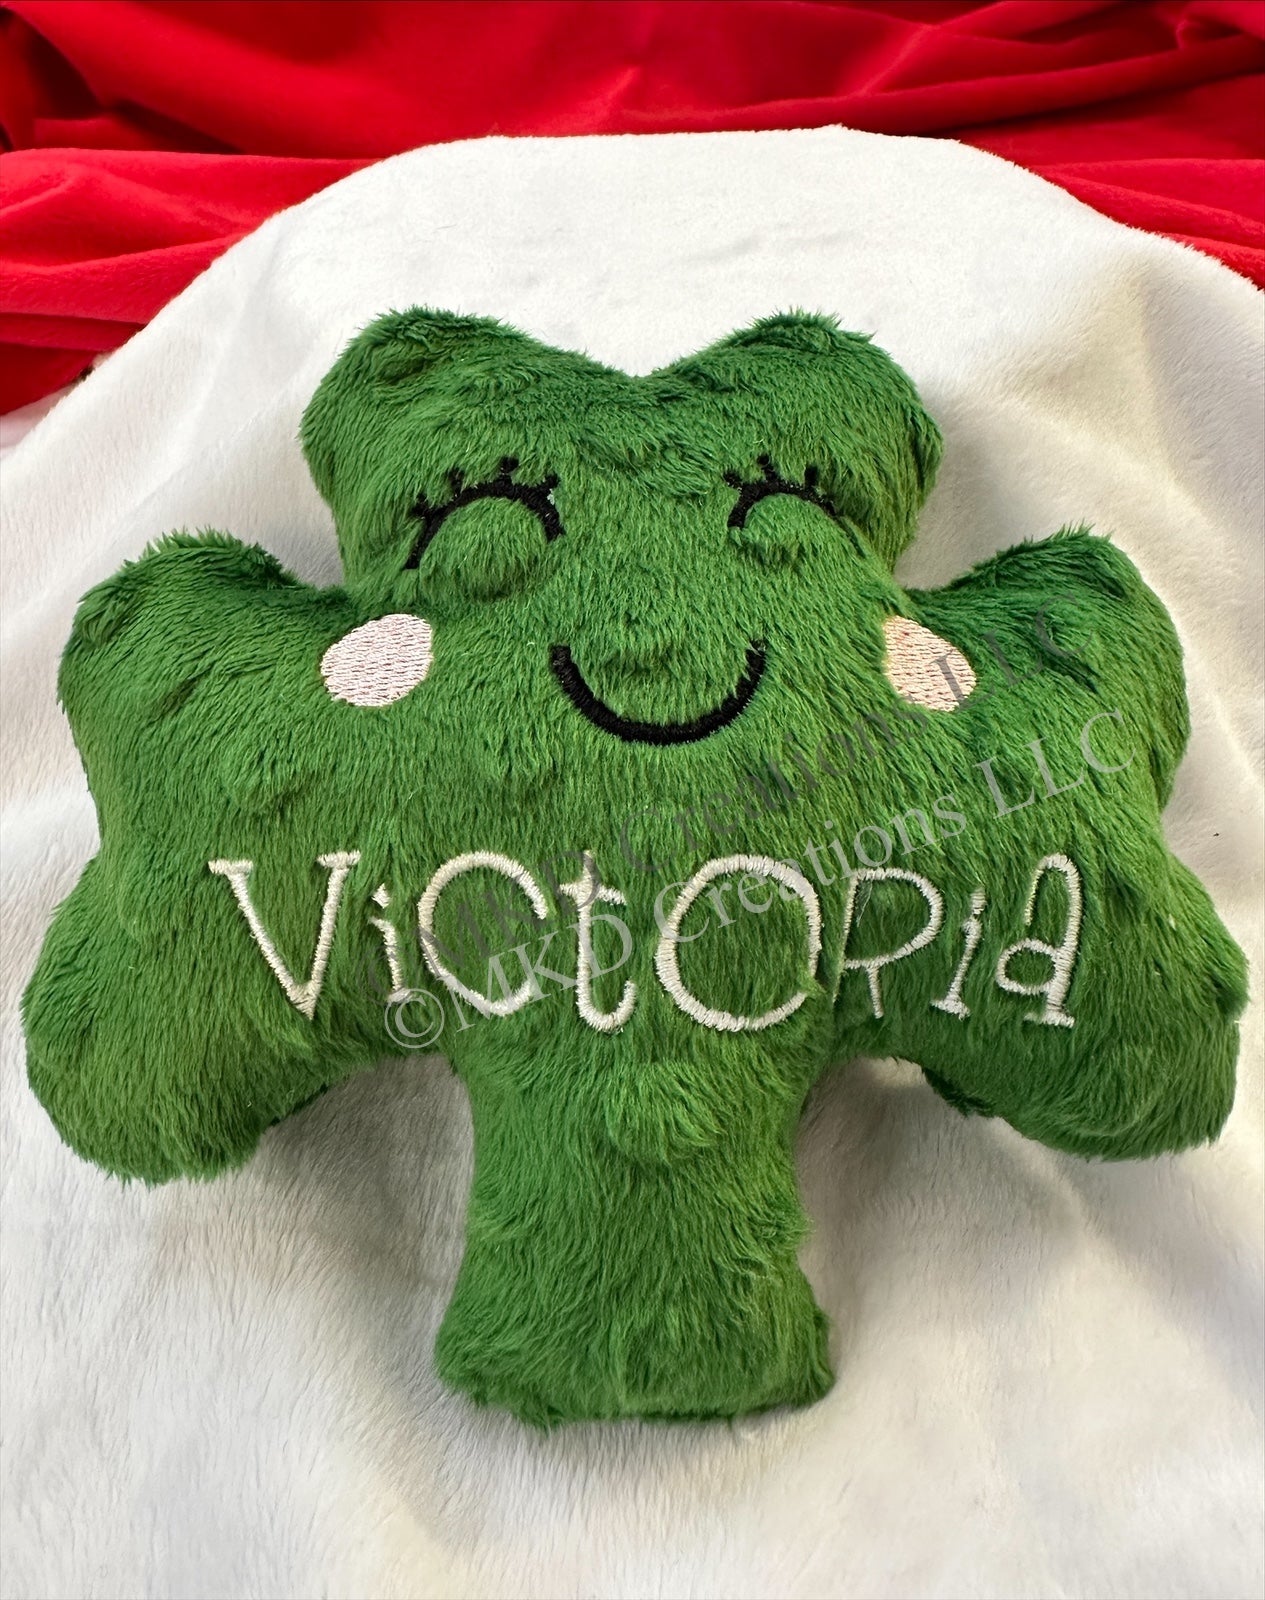 Personalized ShamrockPlushie Heart| Green Shamrock| Add your name for a St Patricks Day gift or treat